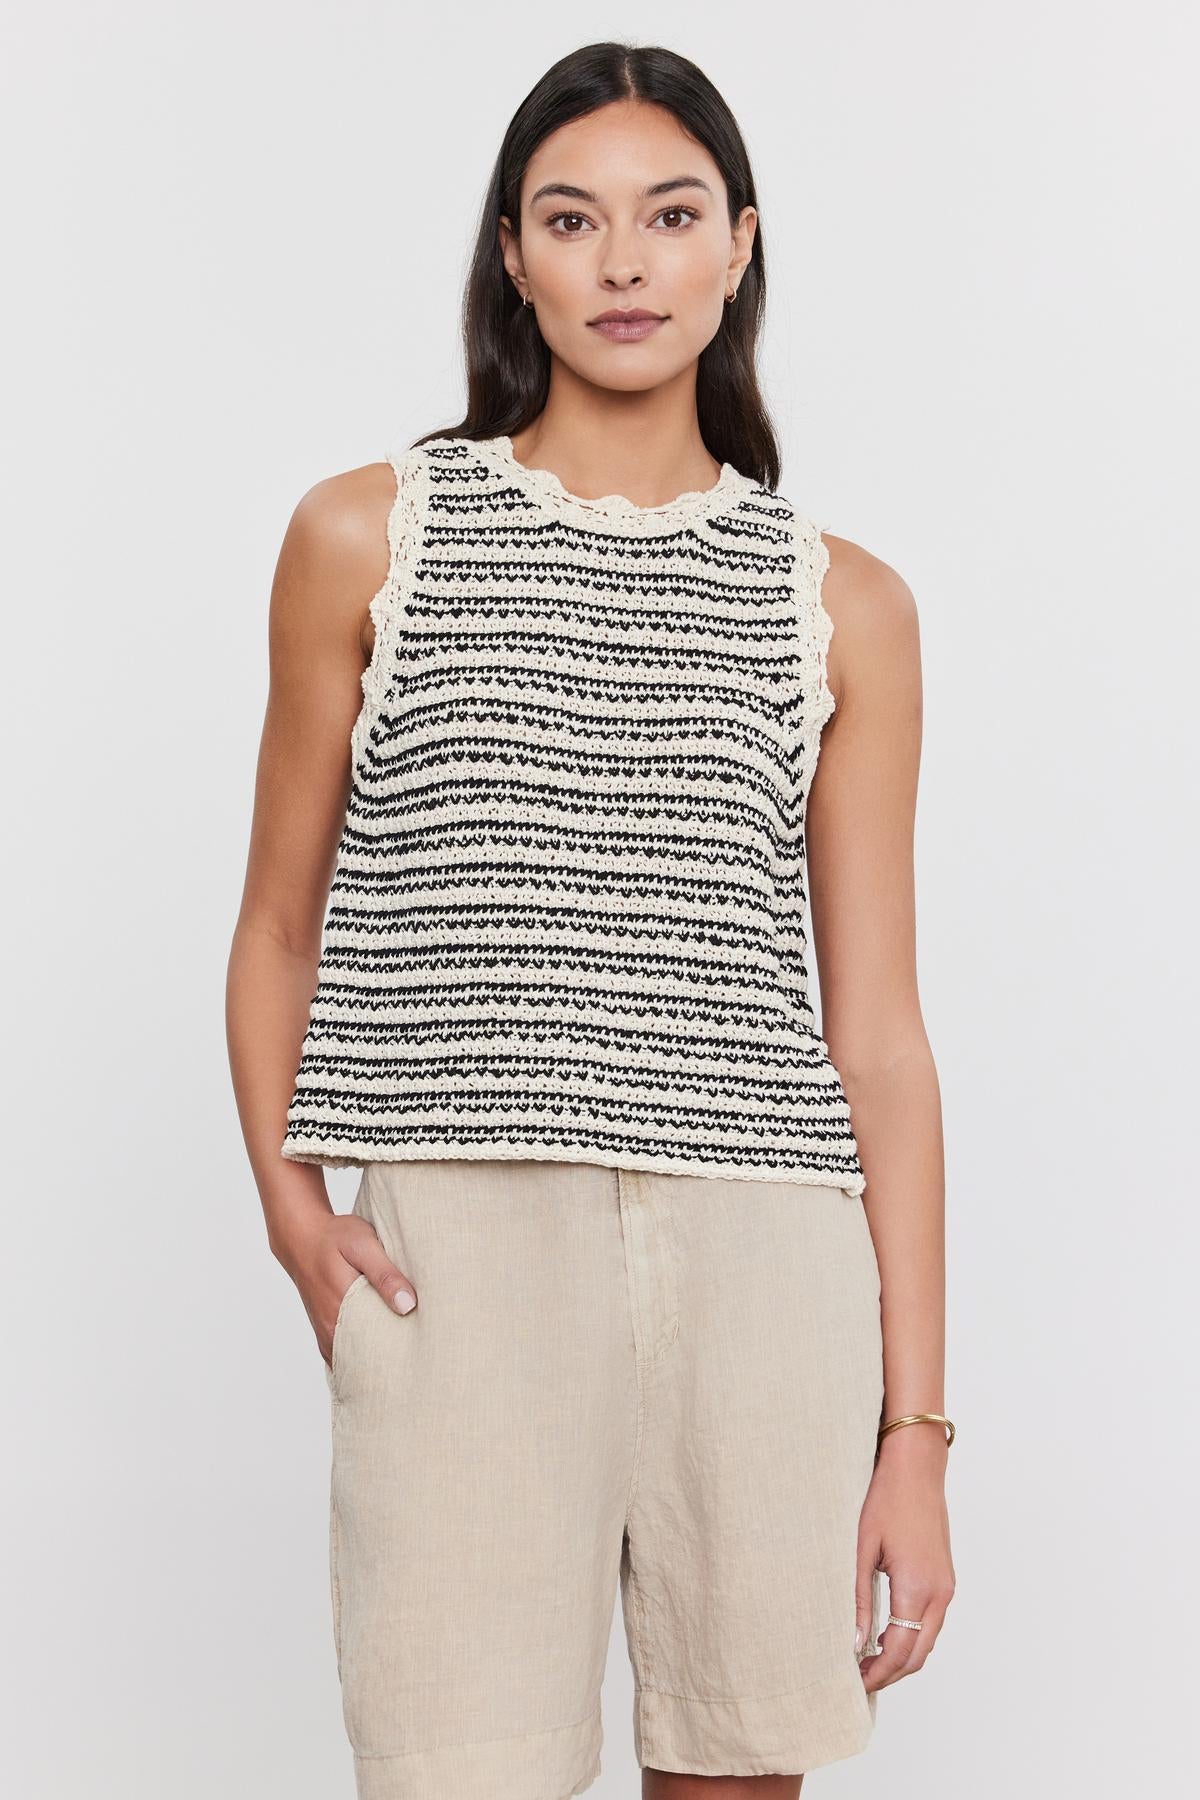 A woman wearing a Velvet by Graham & Spencer SOPHIE SWEATER VEST with scallop details and beige trousers, standing against a white background.-36910013677761